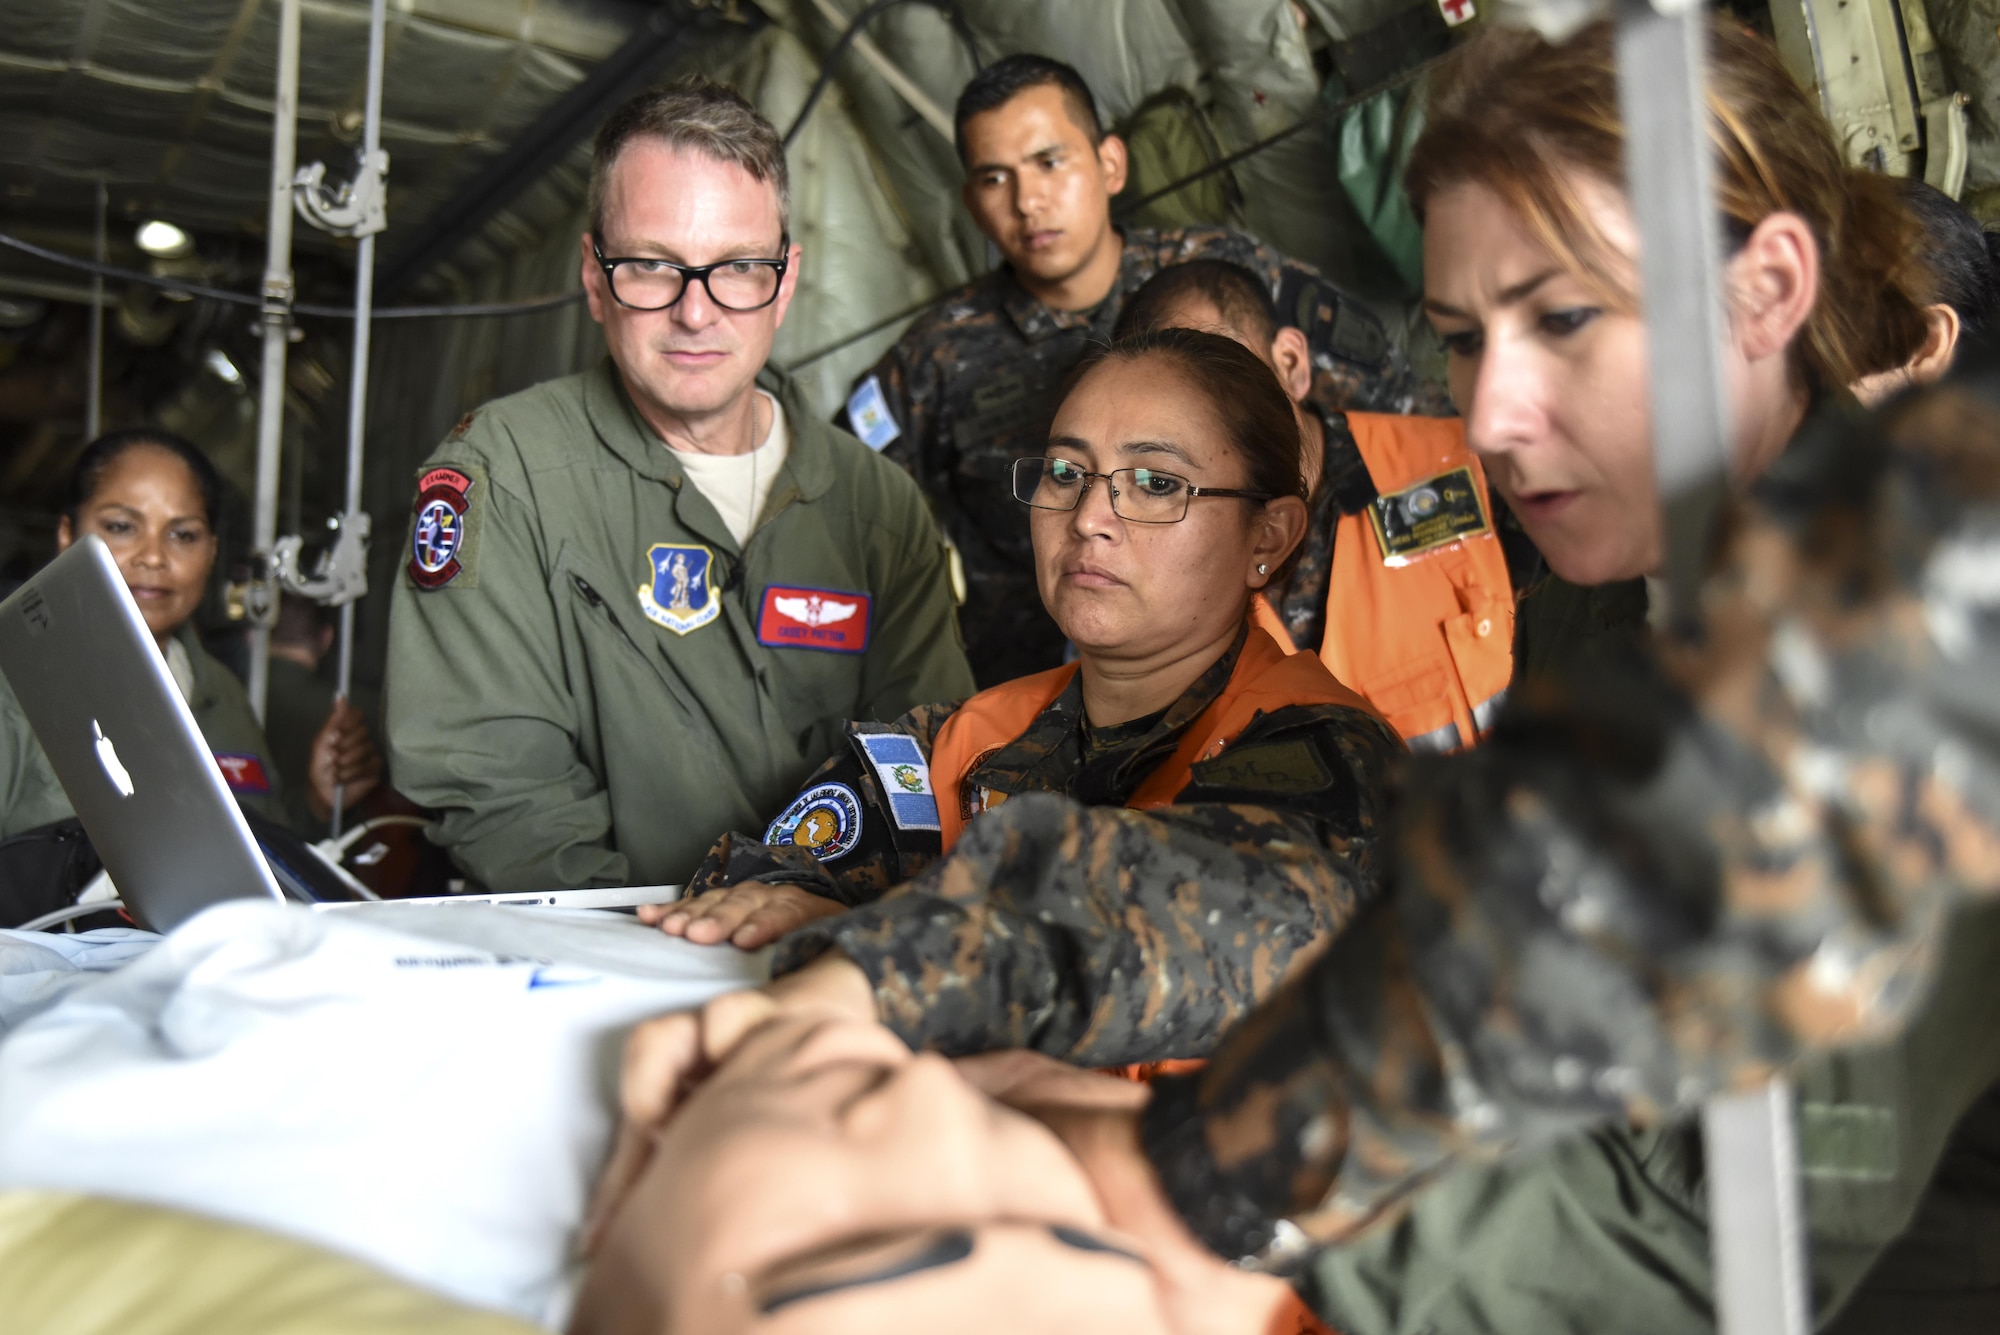 189th Airlift Wing and Guatemalan Air Force demonstrate interoperability with medical training